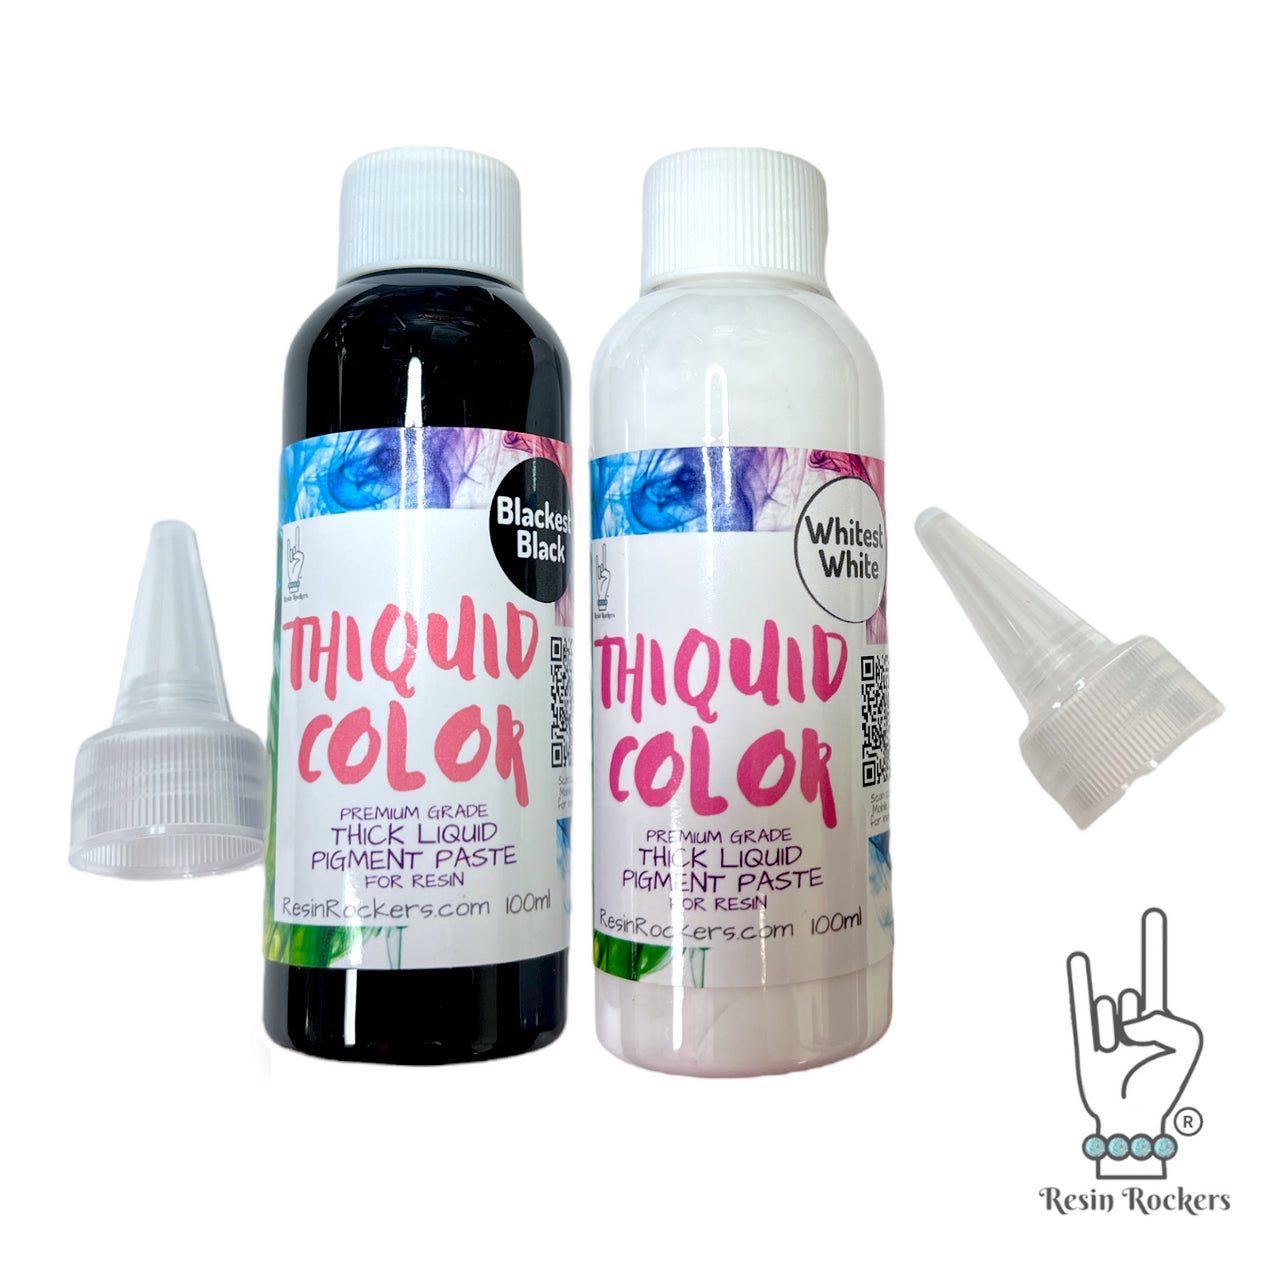 Thiquid Blackest Black and Whitest White Kit 100 ml Liquid Concentrated Pigment for Epoxy Resin Art